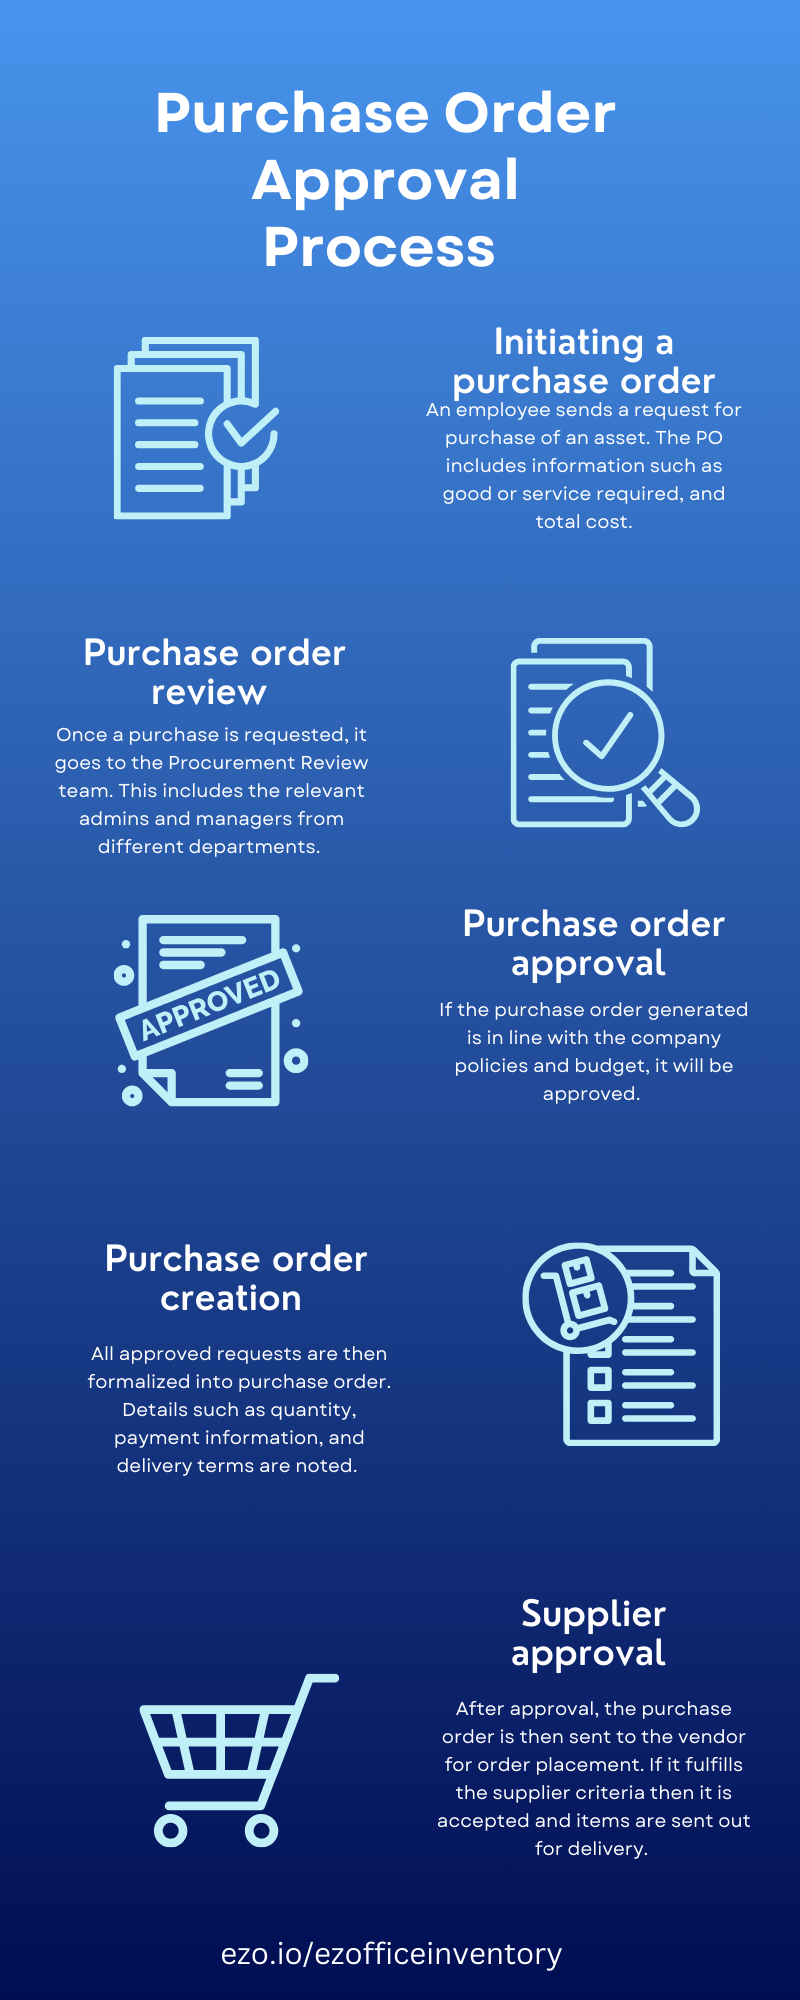 Purchase order approval process